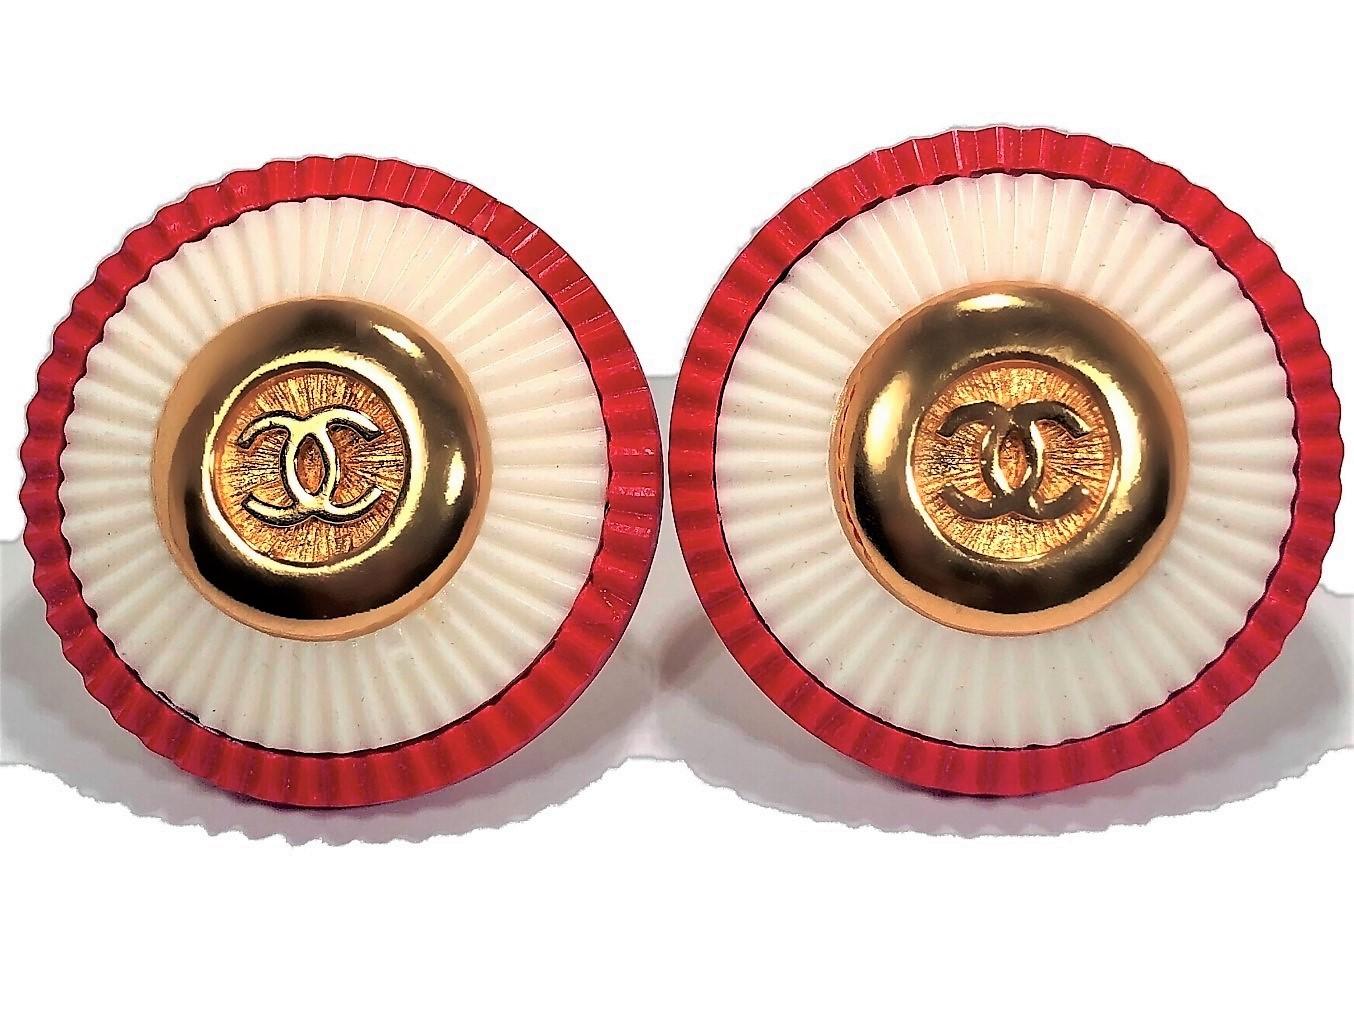 These amazing vintage Chanel earrings are from the early 1980's and are extremely rare. The beautiful red and white resin material is in excellent condition. They measure a large  1 1/2 inch diameter and make quite an impression when worn. Marked